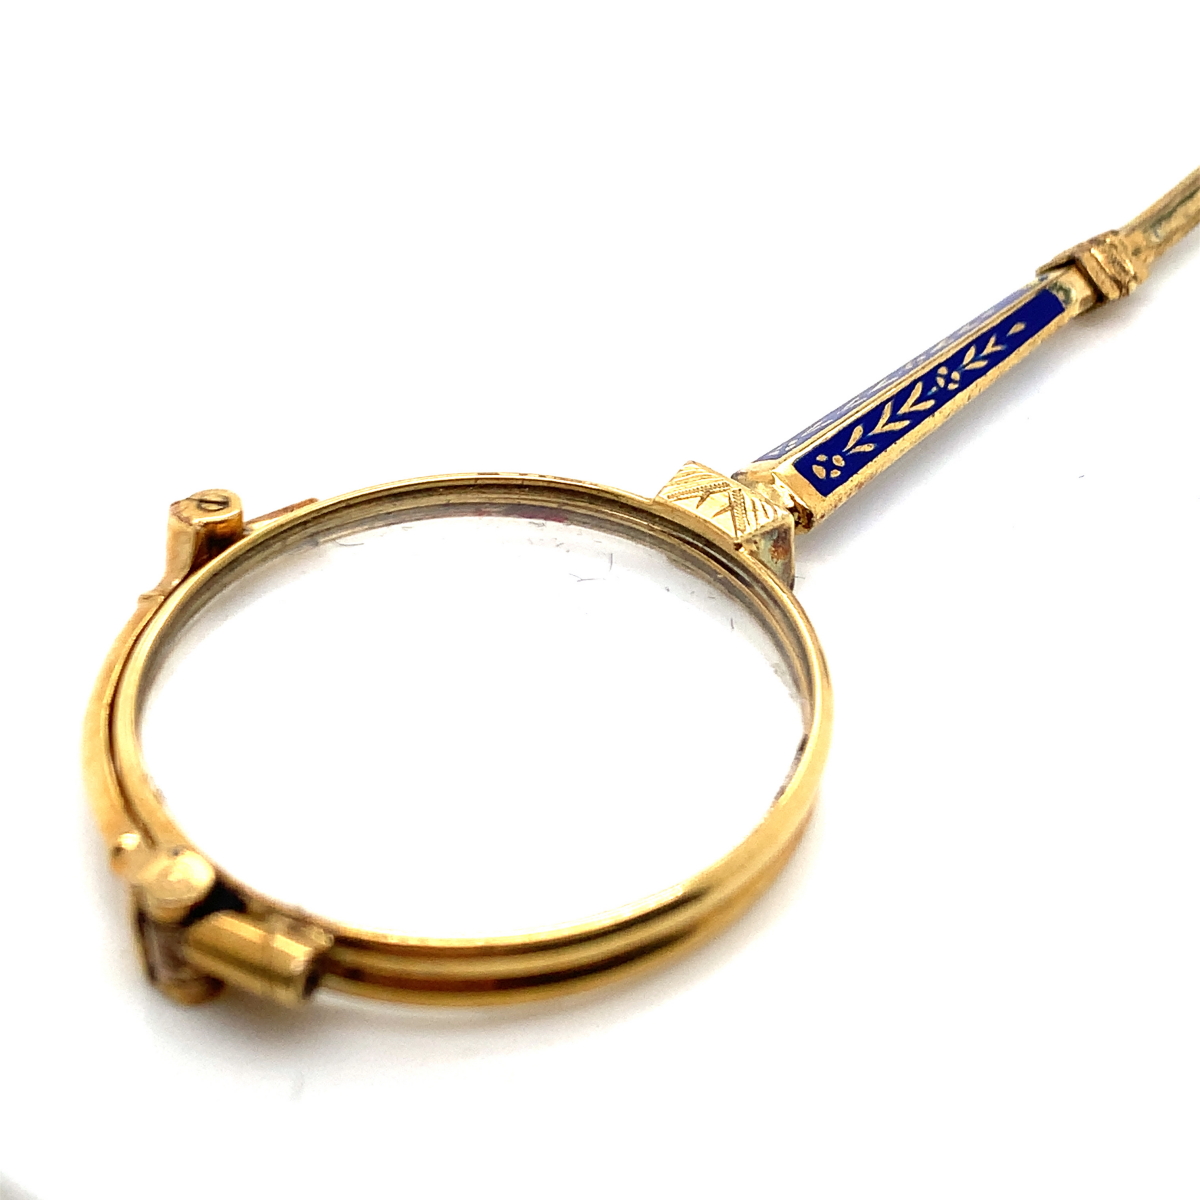 A PAIR OF ANTIQUE LORGNETTE WITH ENAMEL HANDLE.